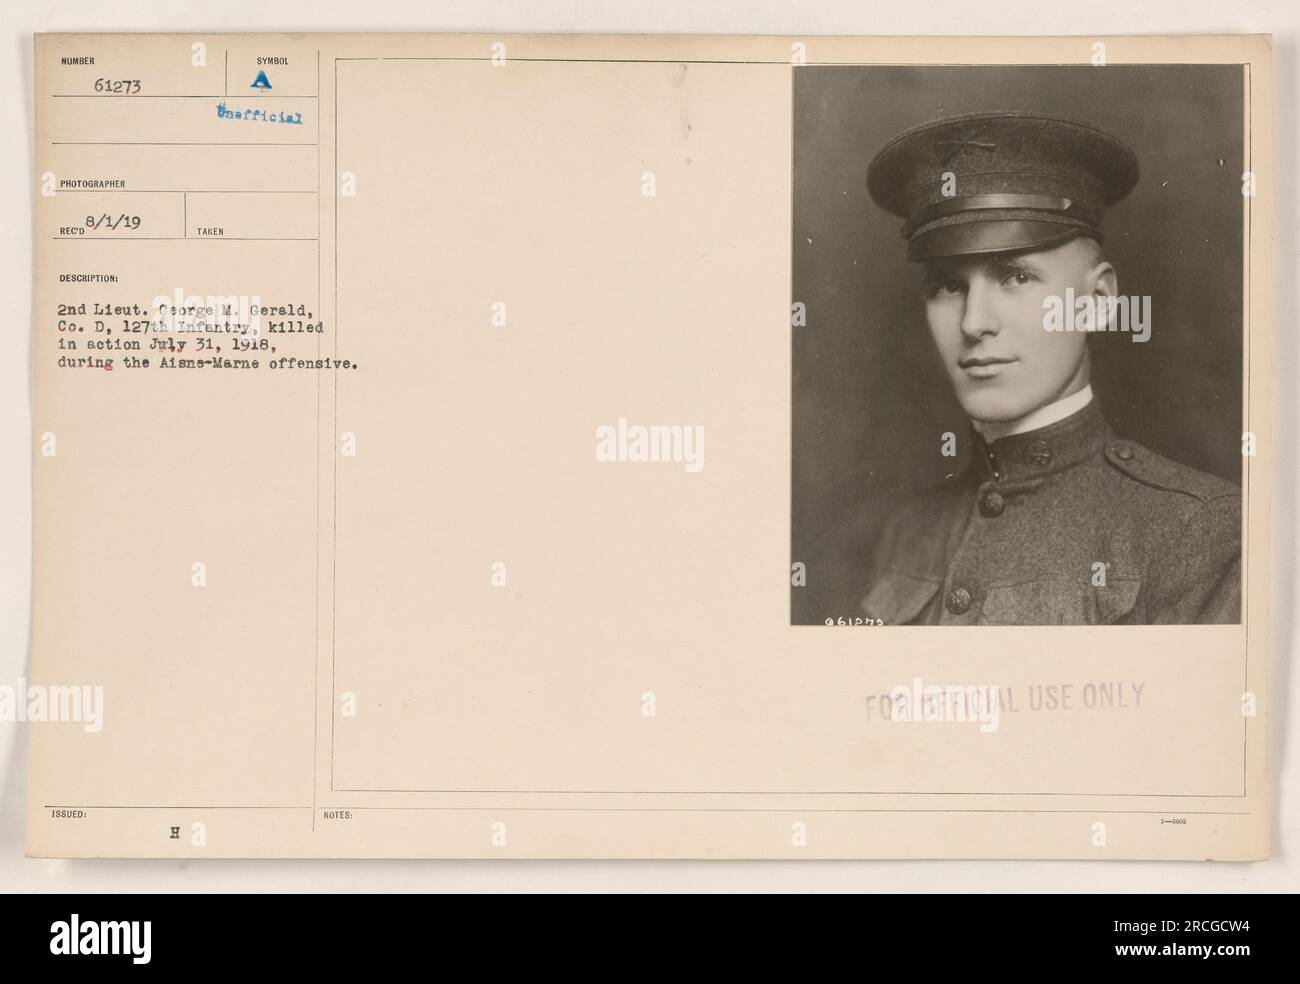 2nd Lt. George M. Gerald of Co. D, 127th Infantry, was killed in action on July 31, 1918, during the Aisne-Marne offensive. This photograph, taken on August 1, 1919, shows him in uniform. The image is numbered 61273 and is marked with the stamp 'For Official Use Only.' Stock Photo